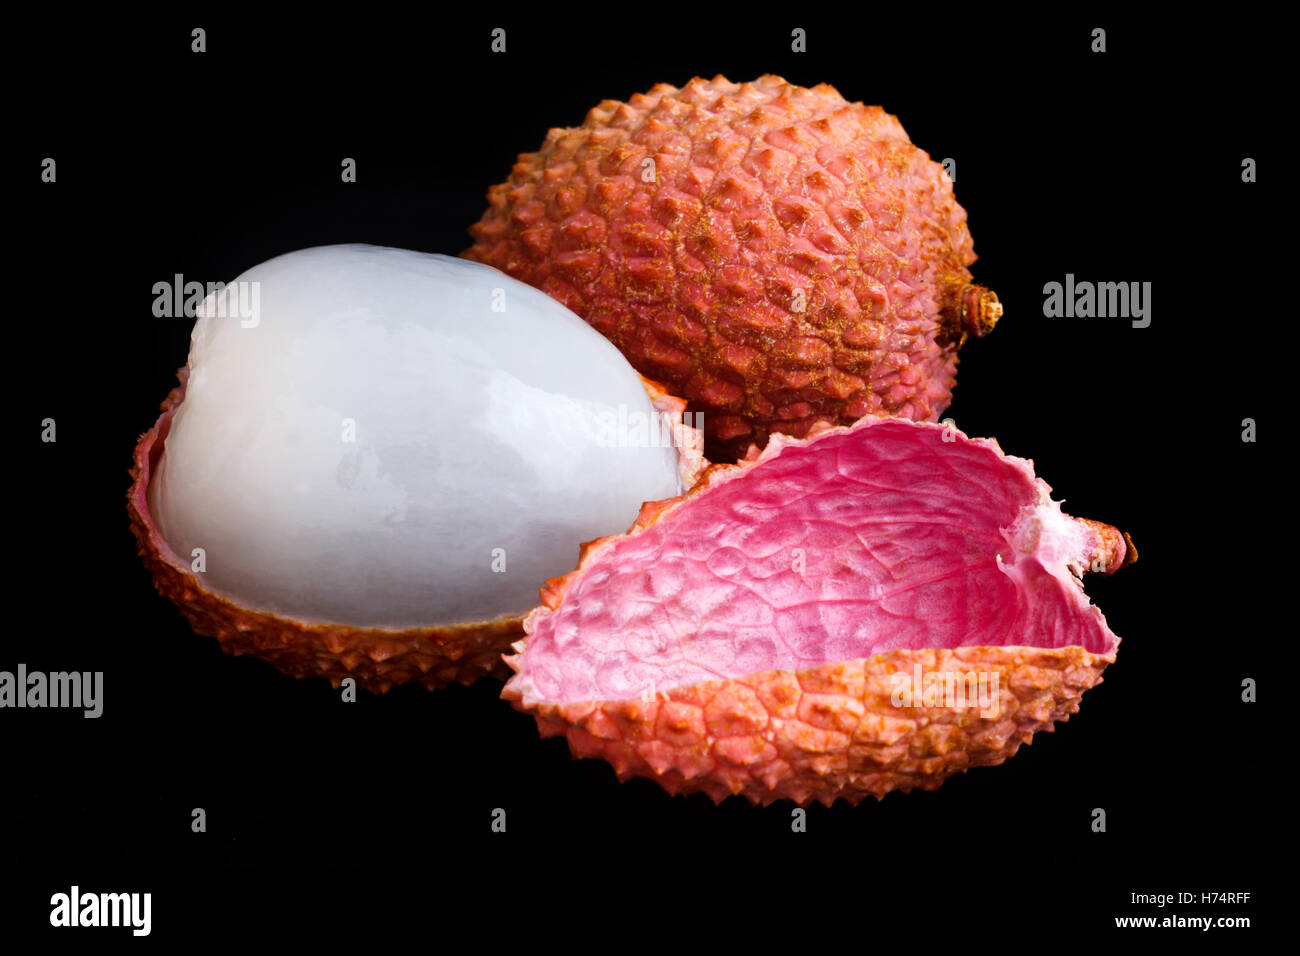 Single litchi with skin removed and flesh. On black. Stock Photo